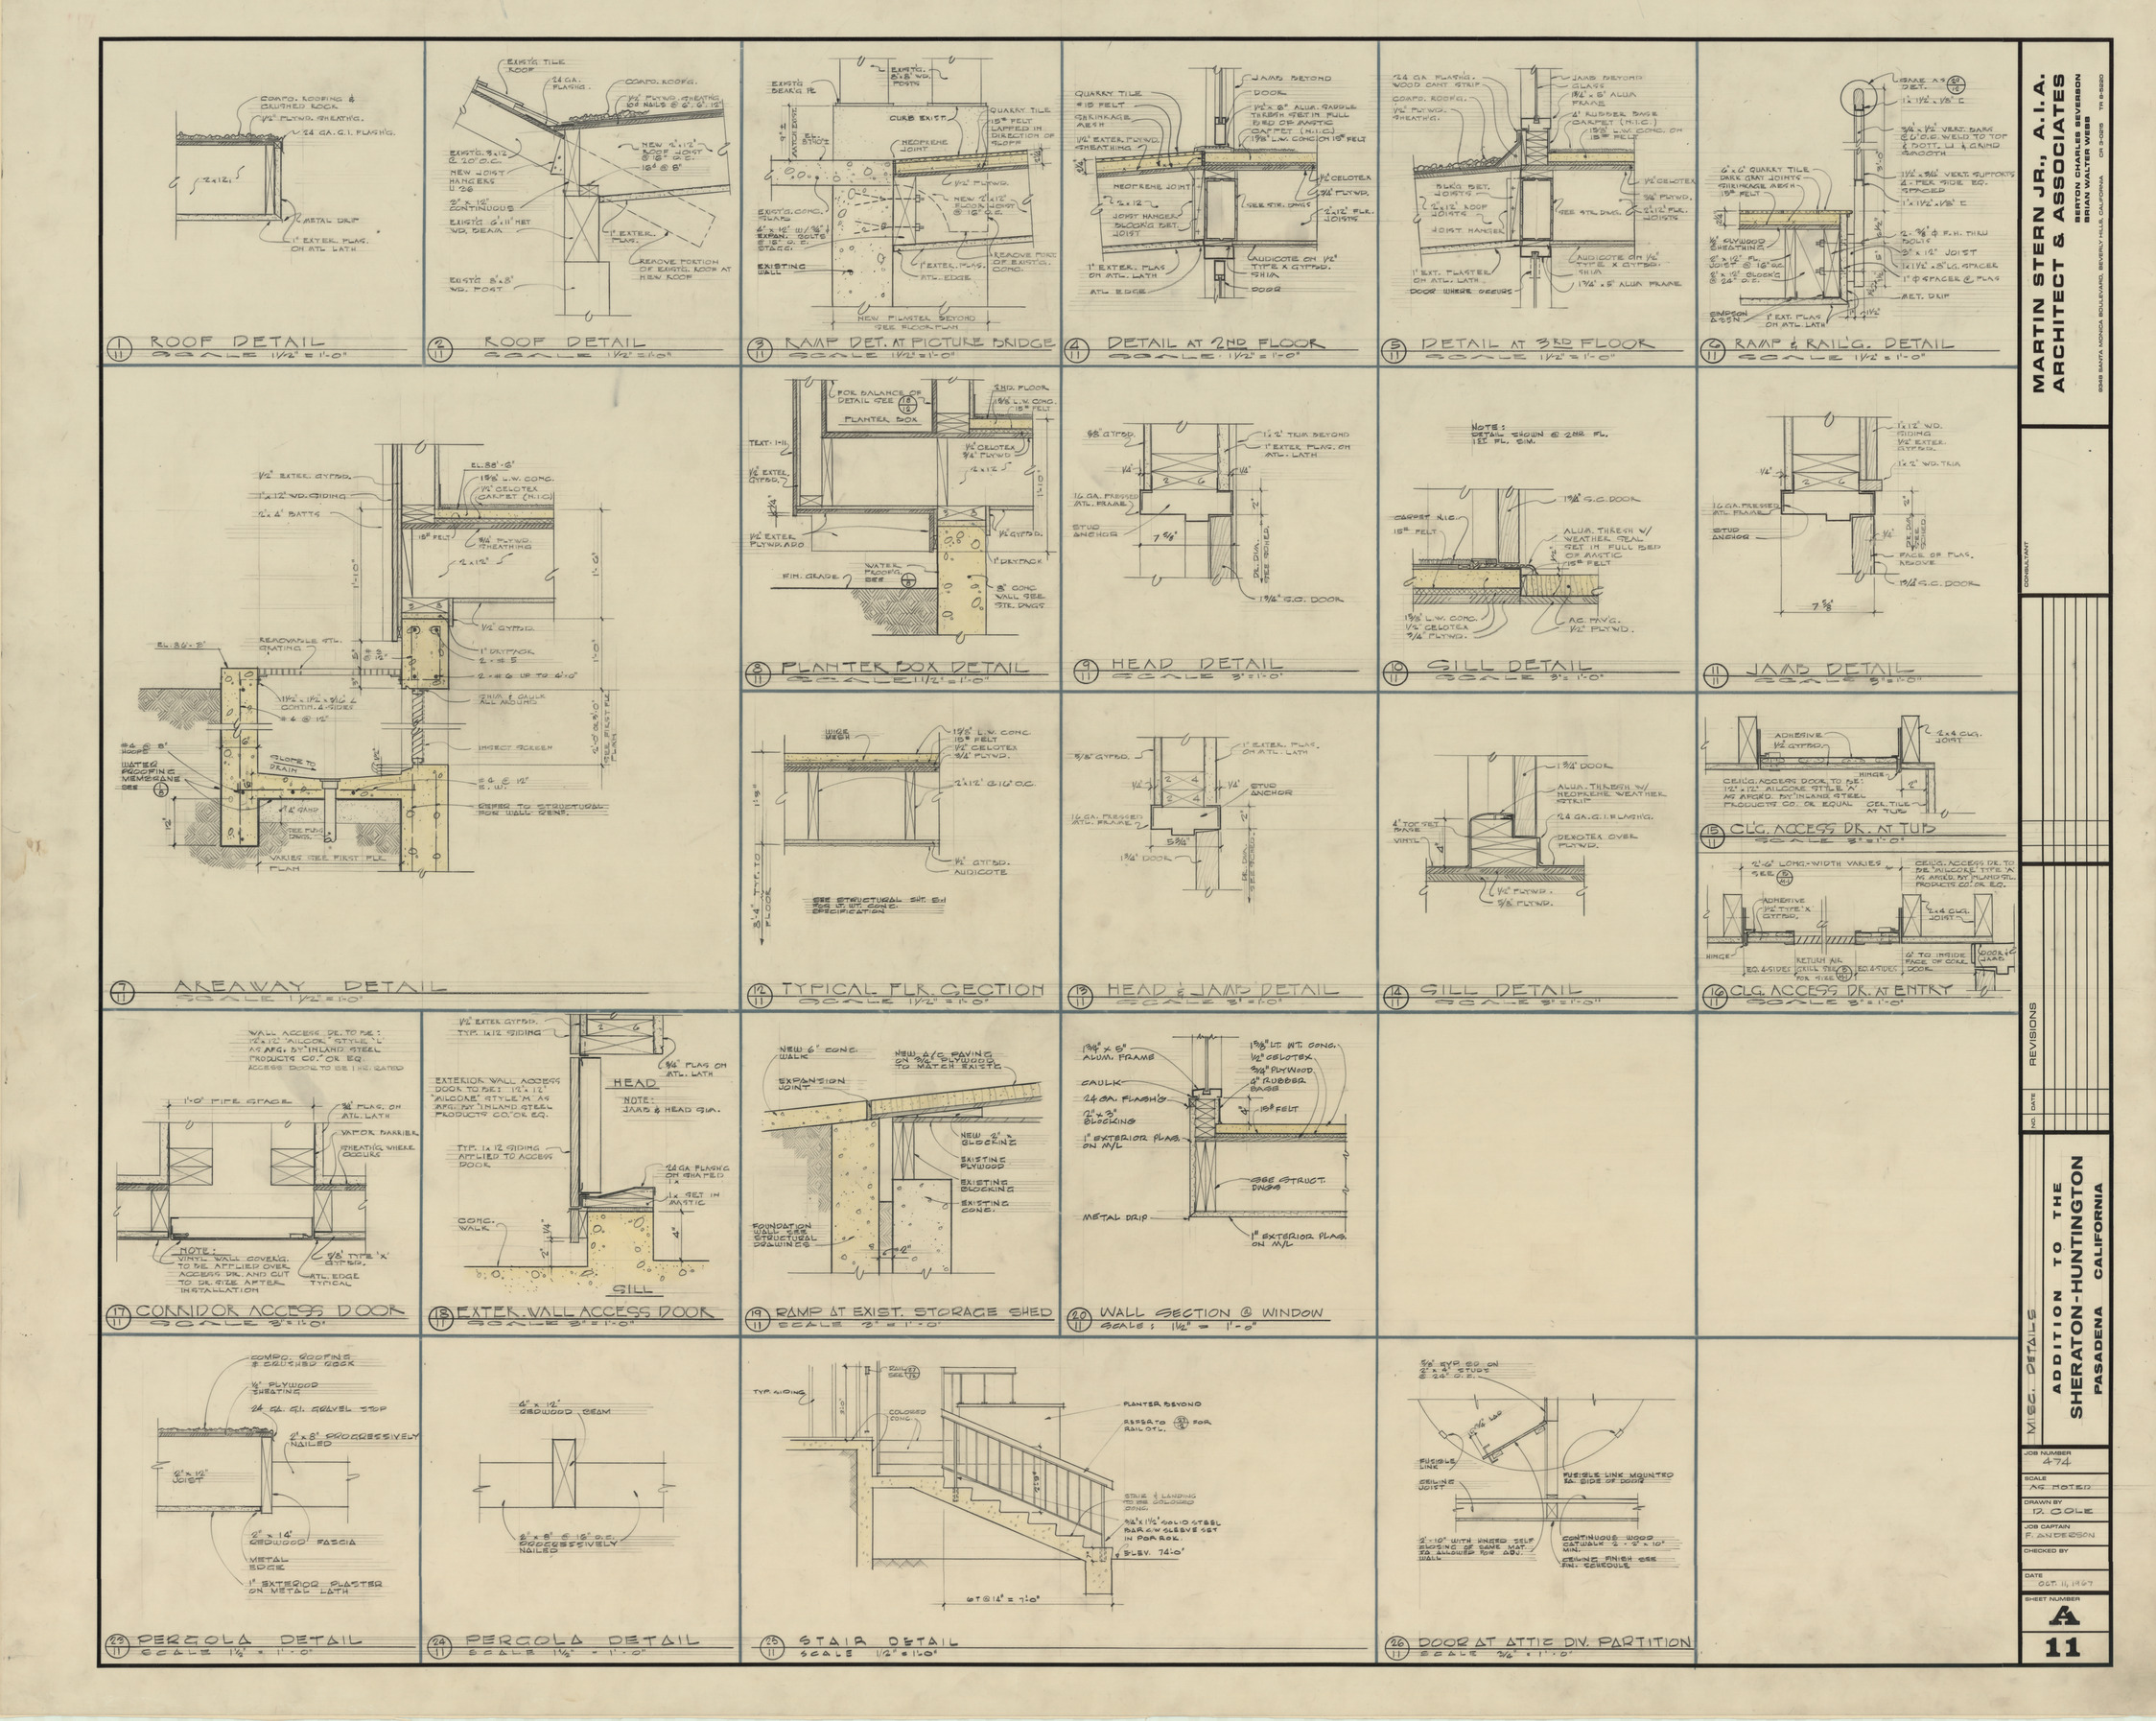 Huntington addition, architectural, electrical, mechanical, and plumbing: architectural drawings, image 012